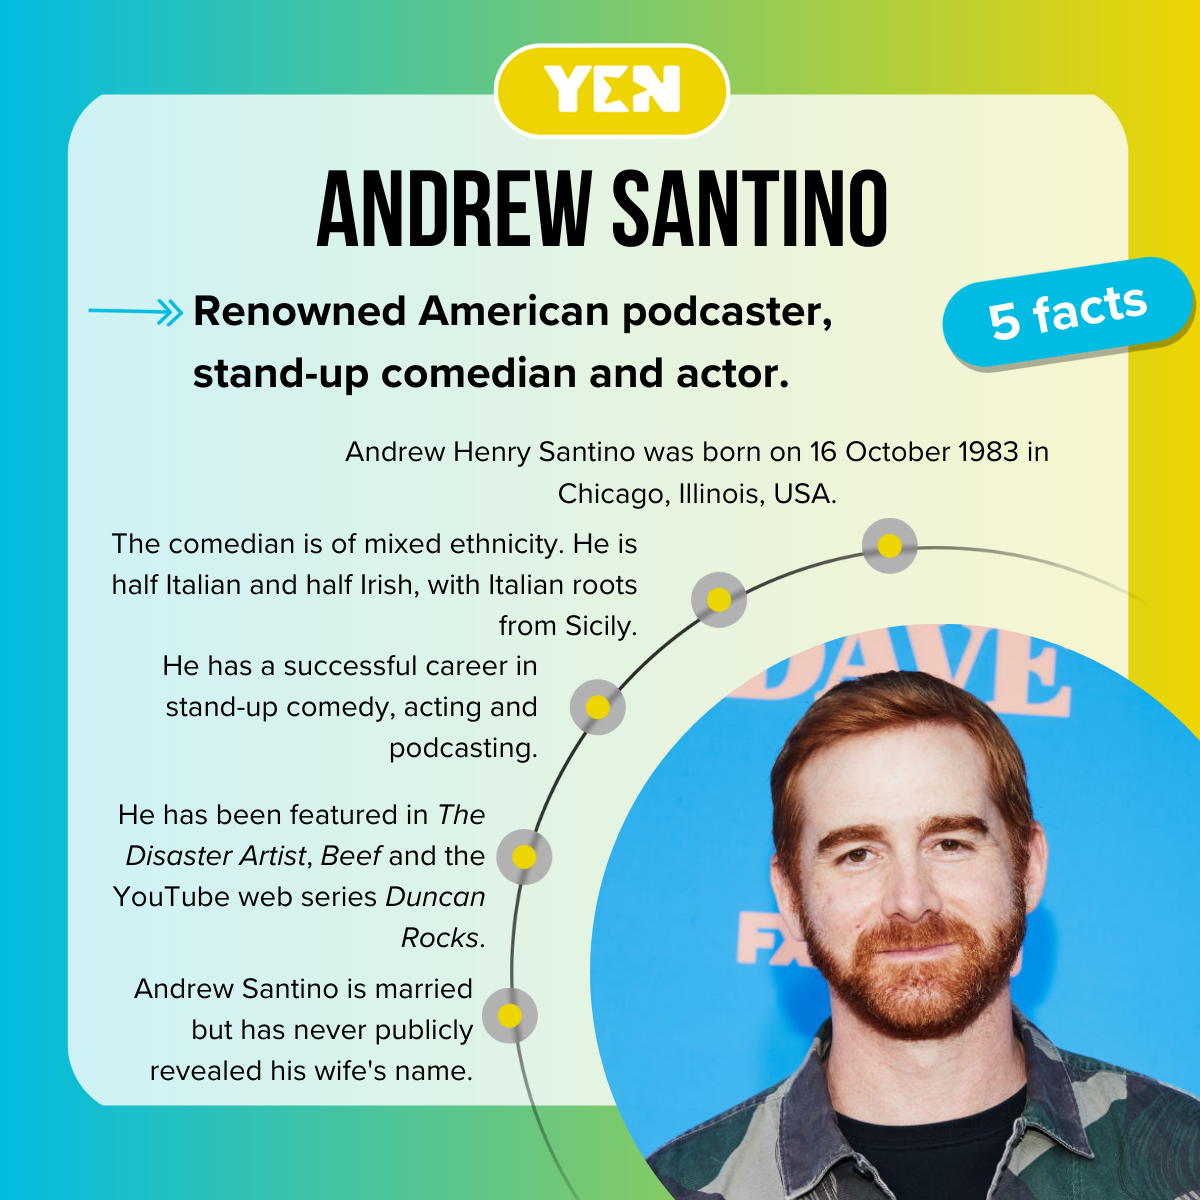 Top facts about Andrew Santino.